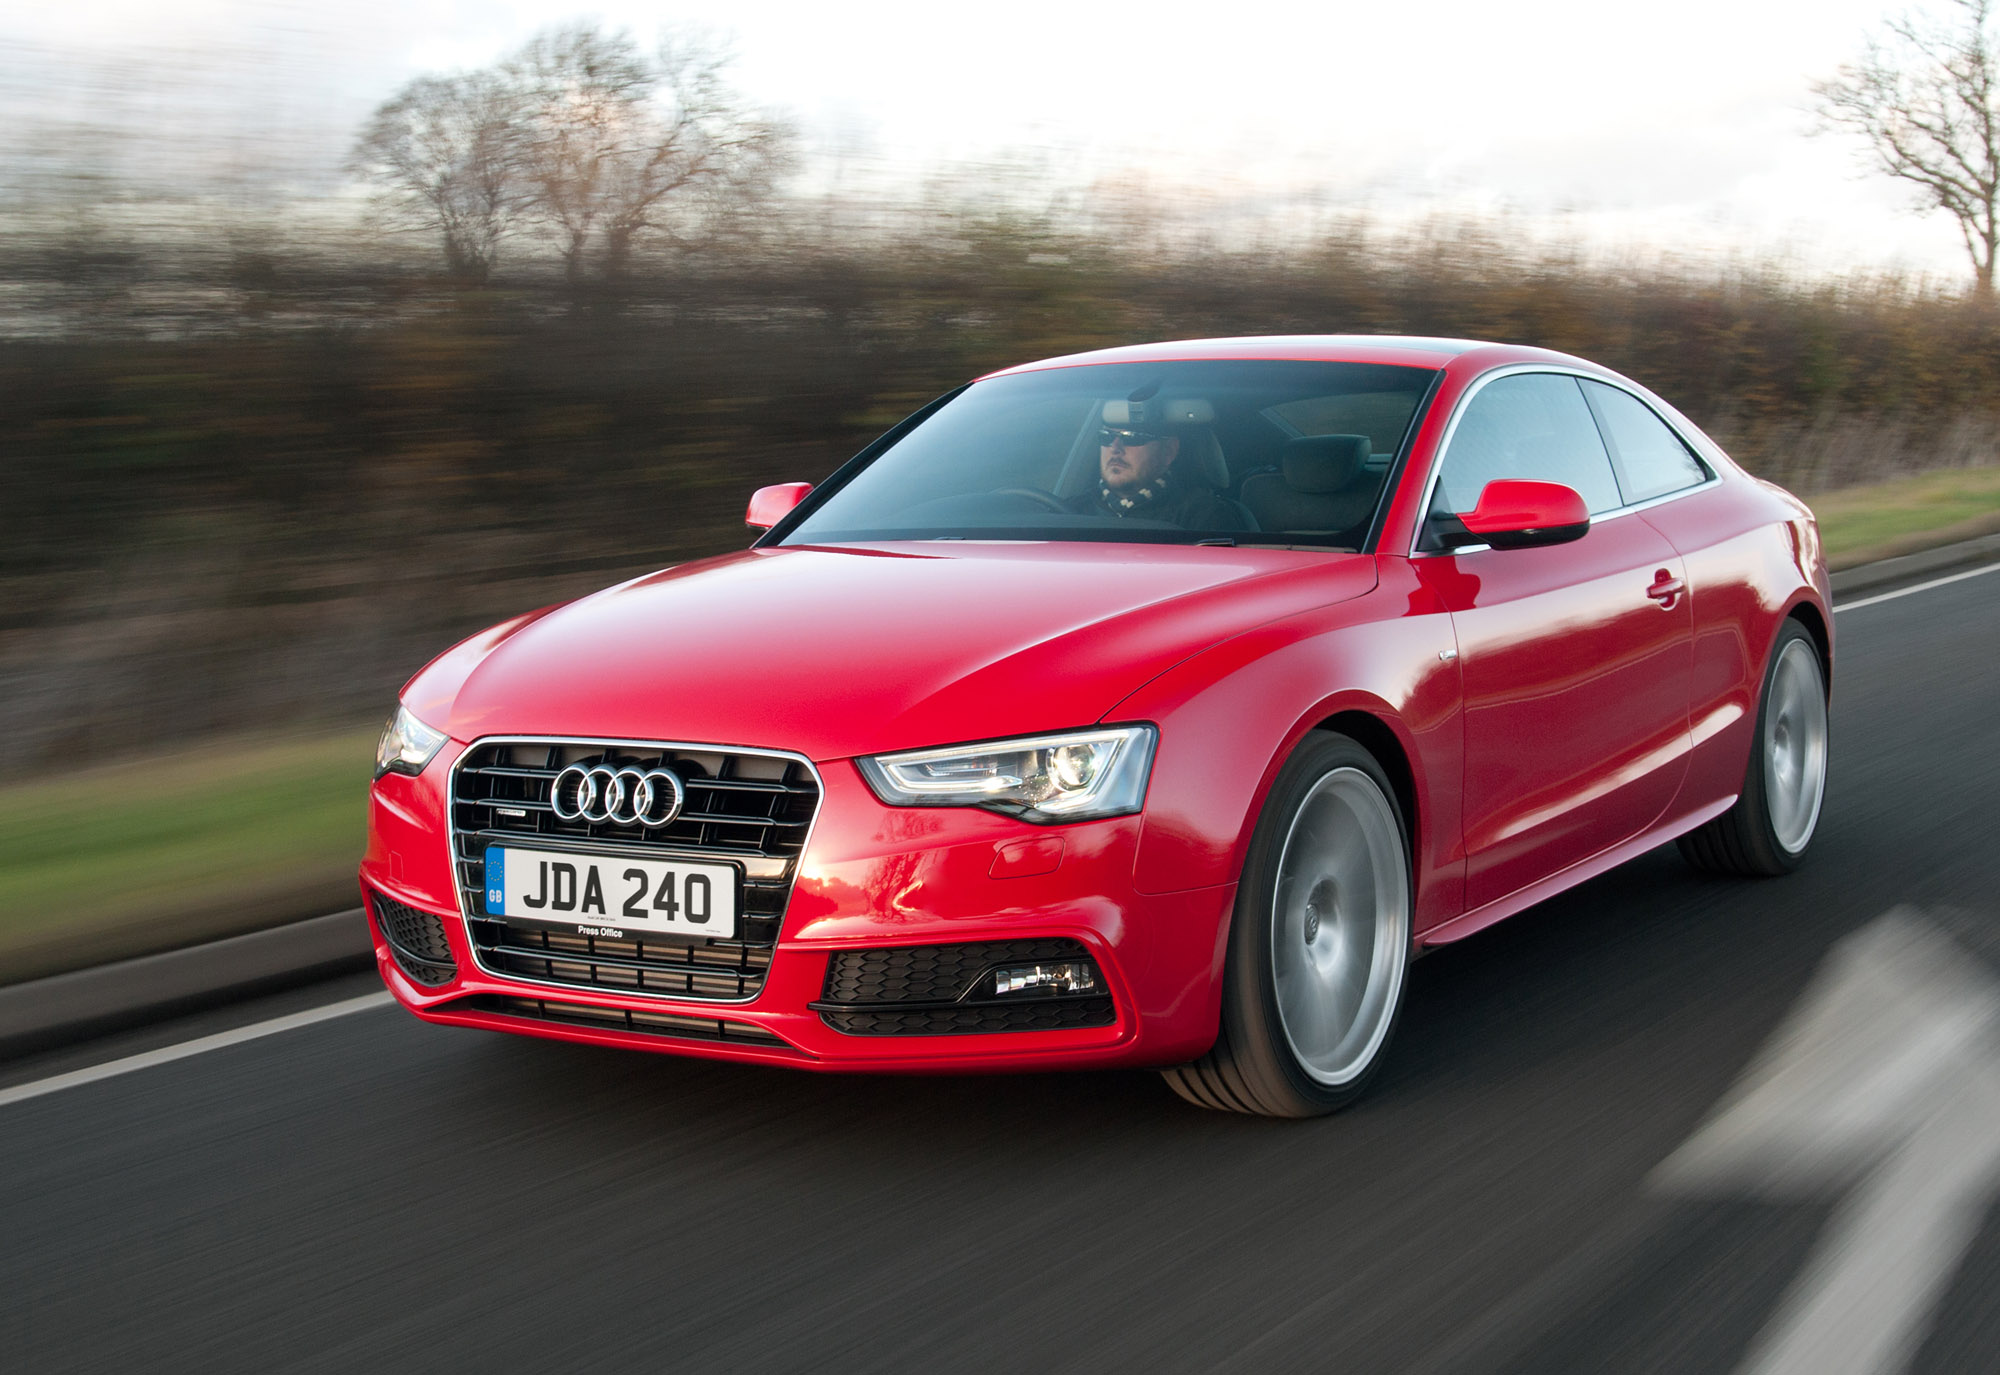 Audi A5 review price, specs and 060 time evo